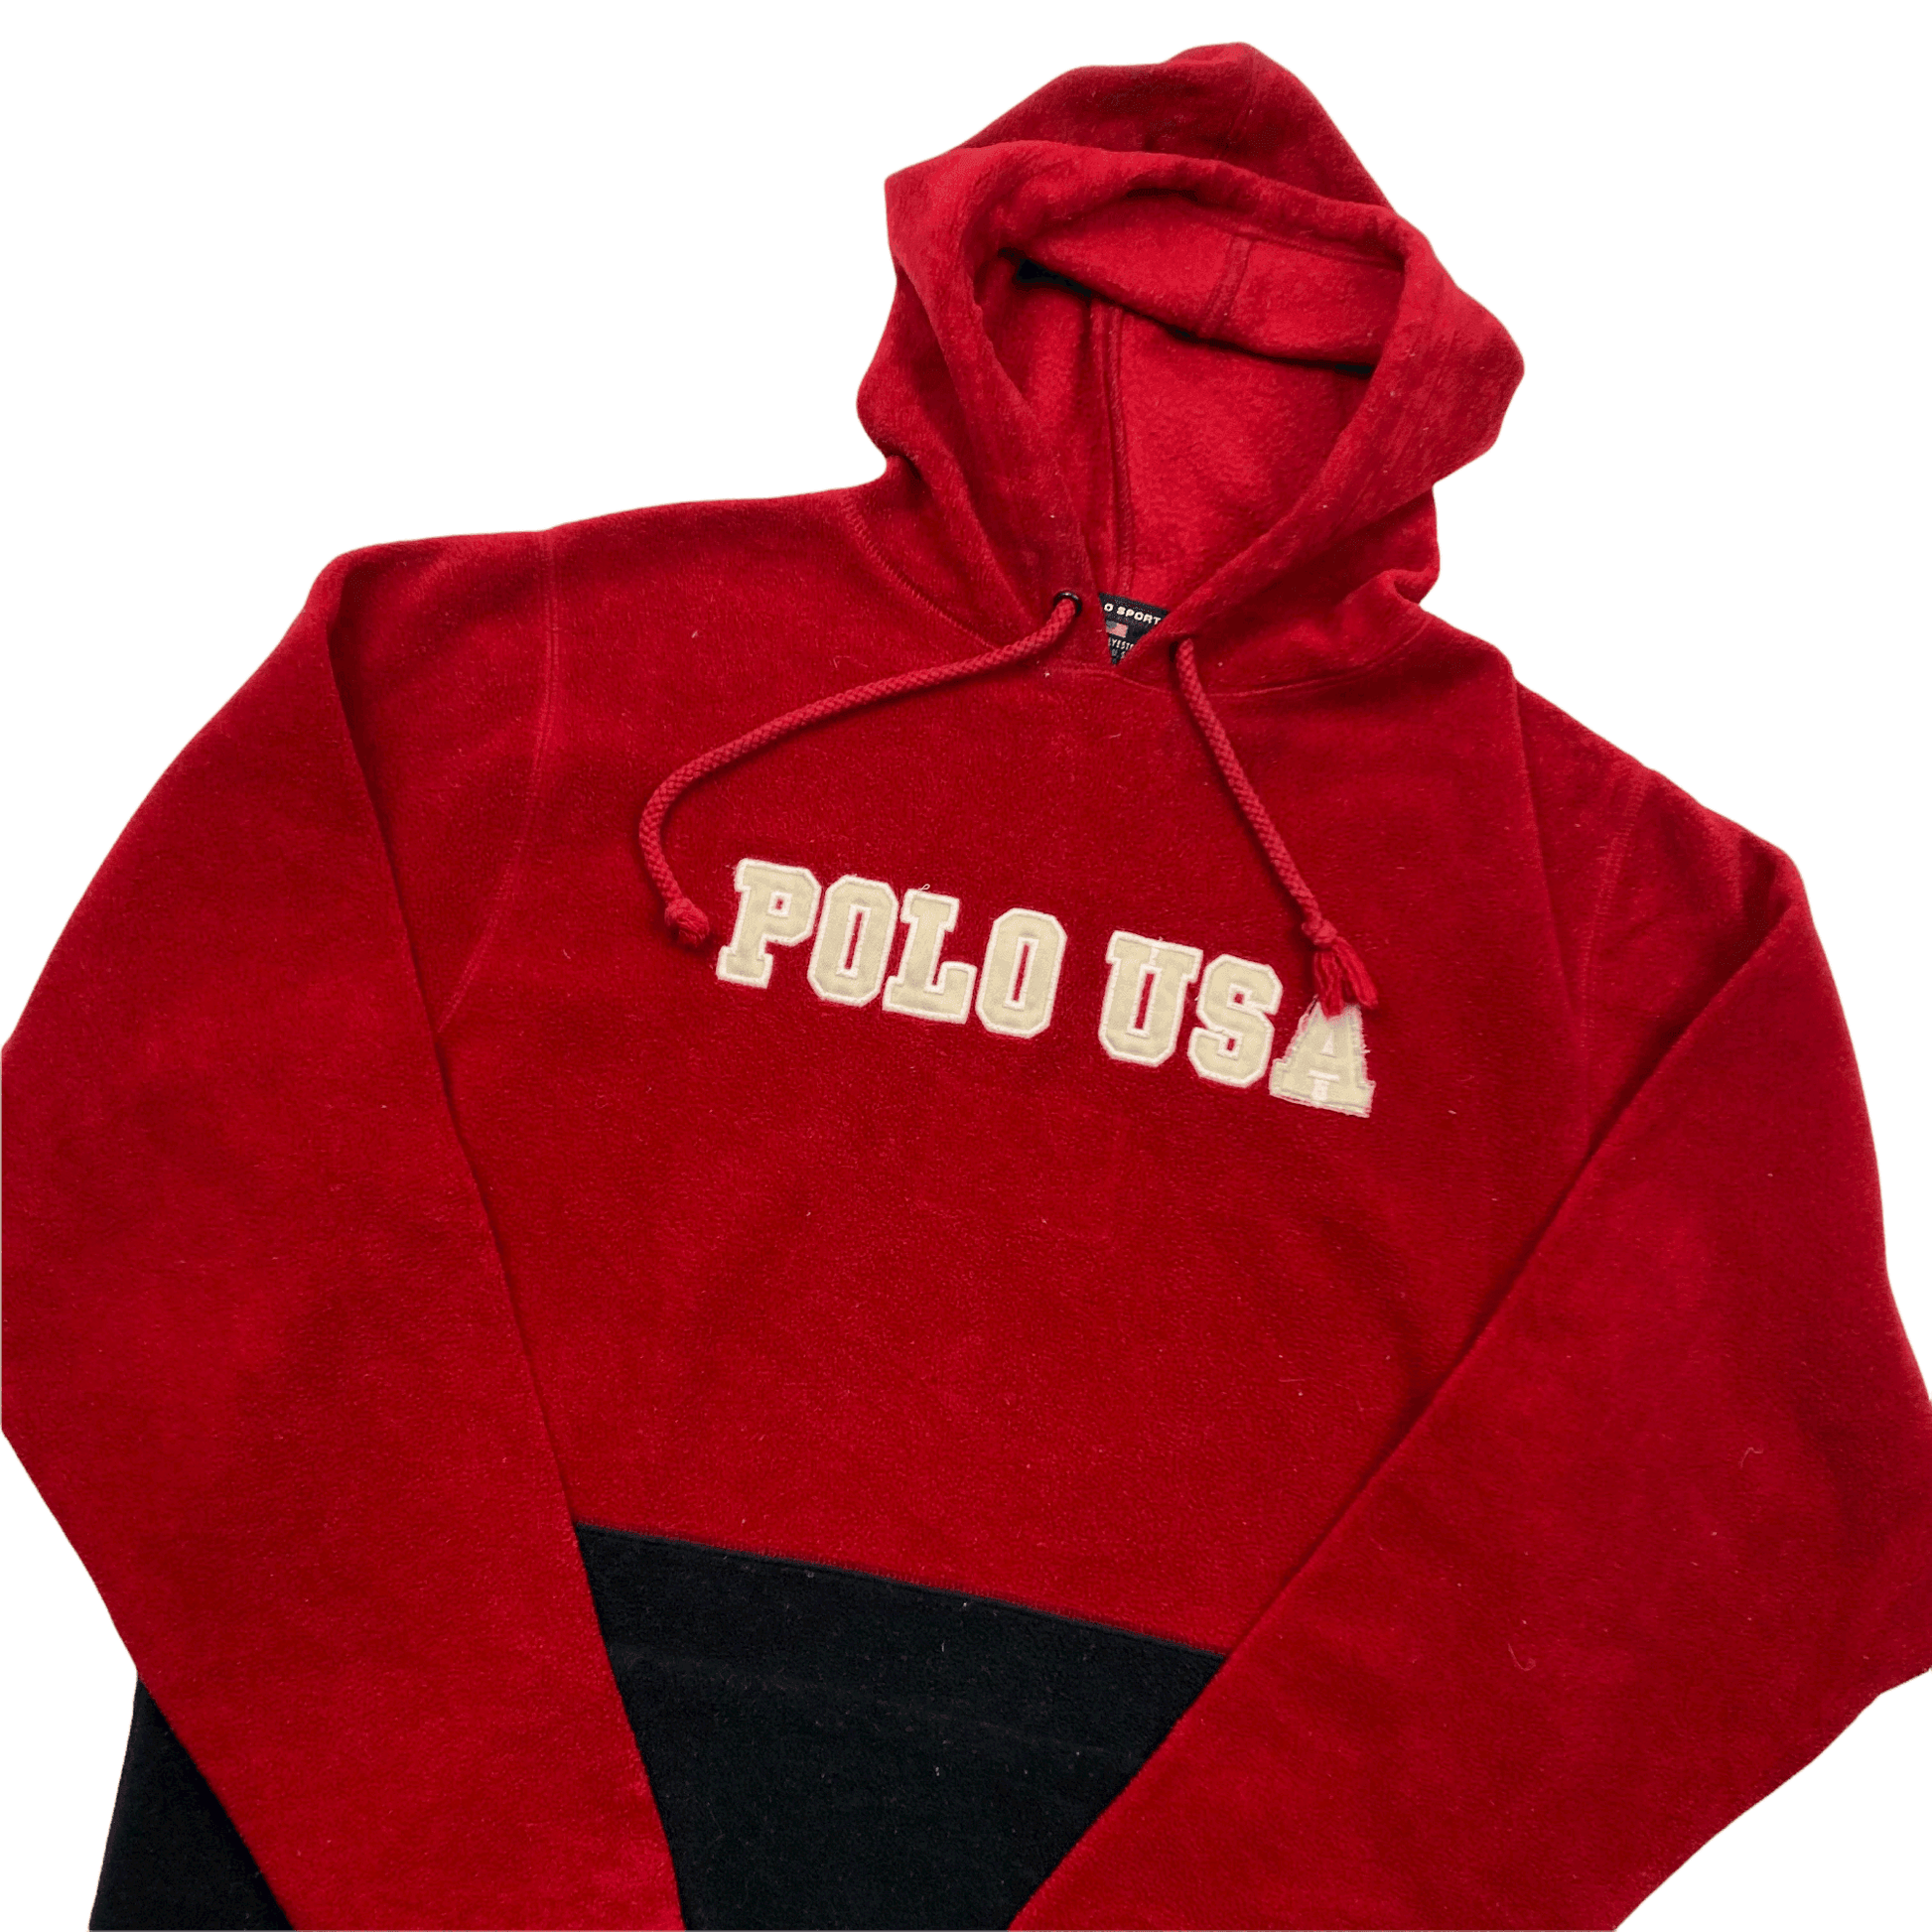 Vintage Red + Black Ralph Lauren Polo Sport USA Spell-Out Fleece Hoodie - Recommend Size - Small - The Streetwear Studio